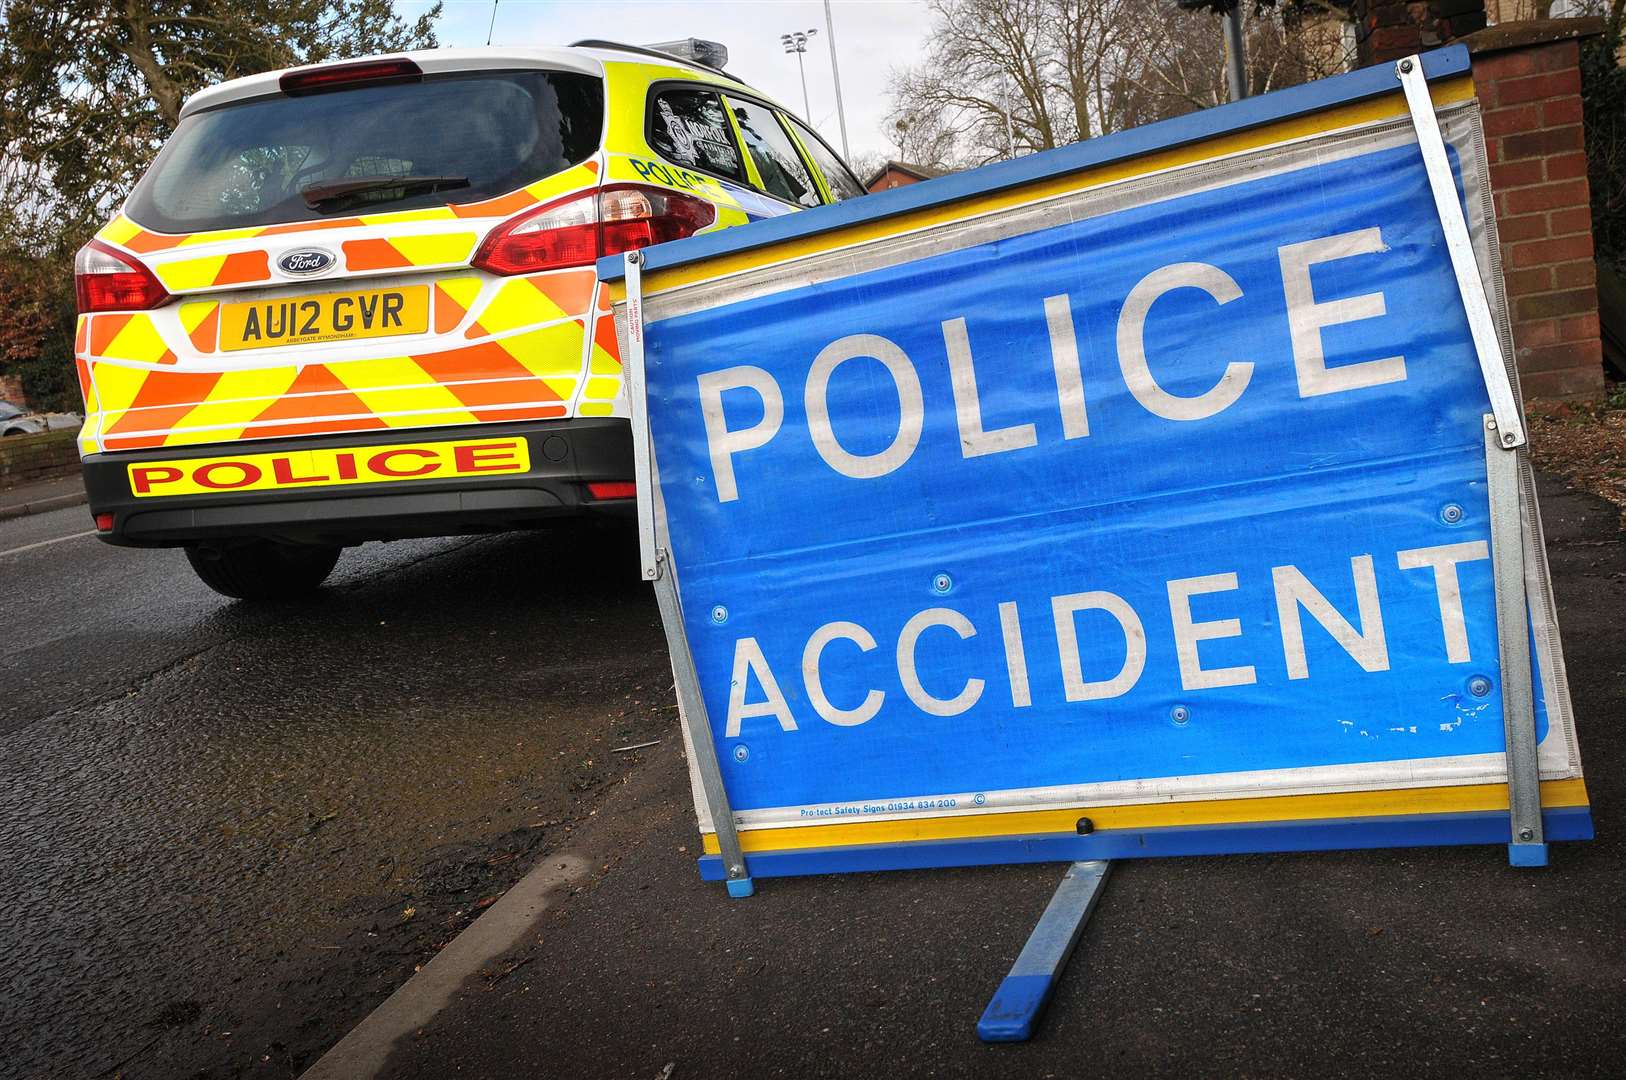 The accident closed the A21 for traffic heading between Tunbridge Wells and Hastings